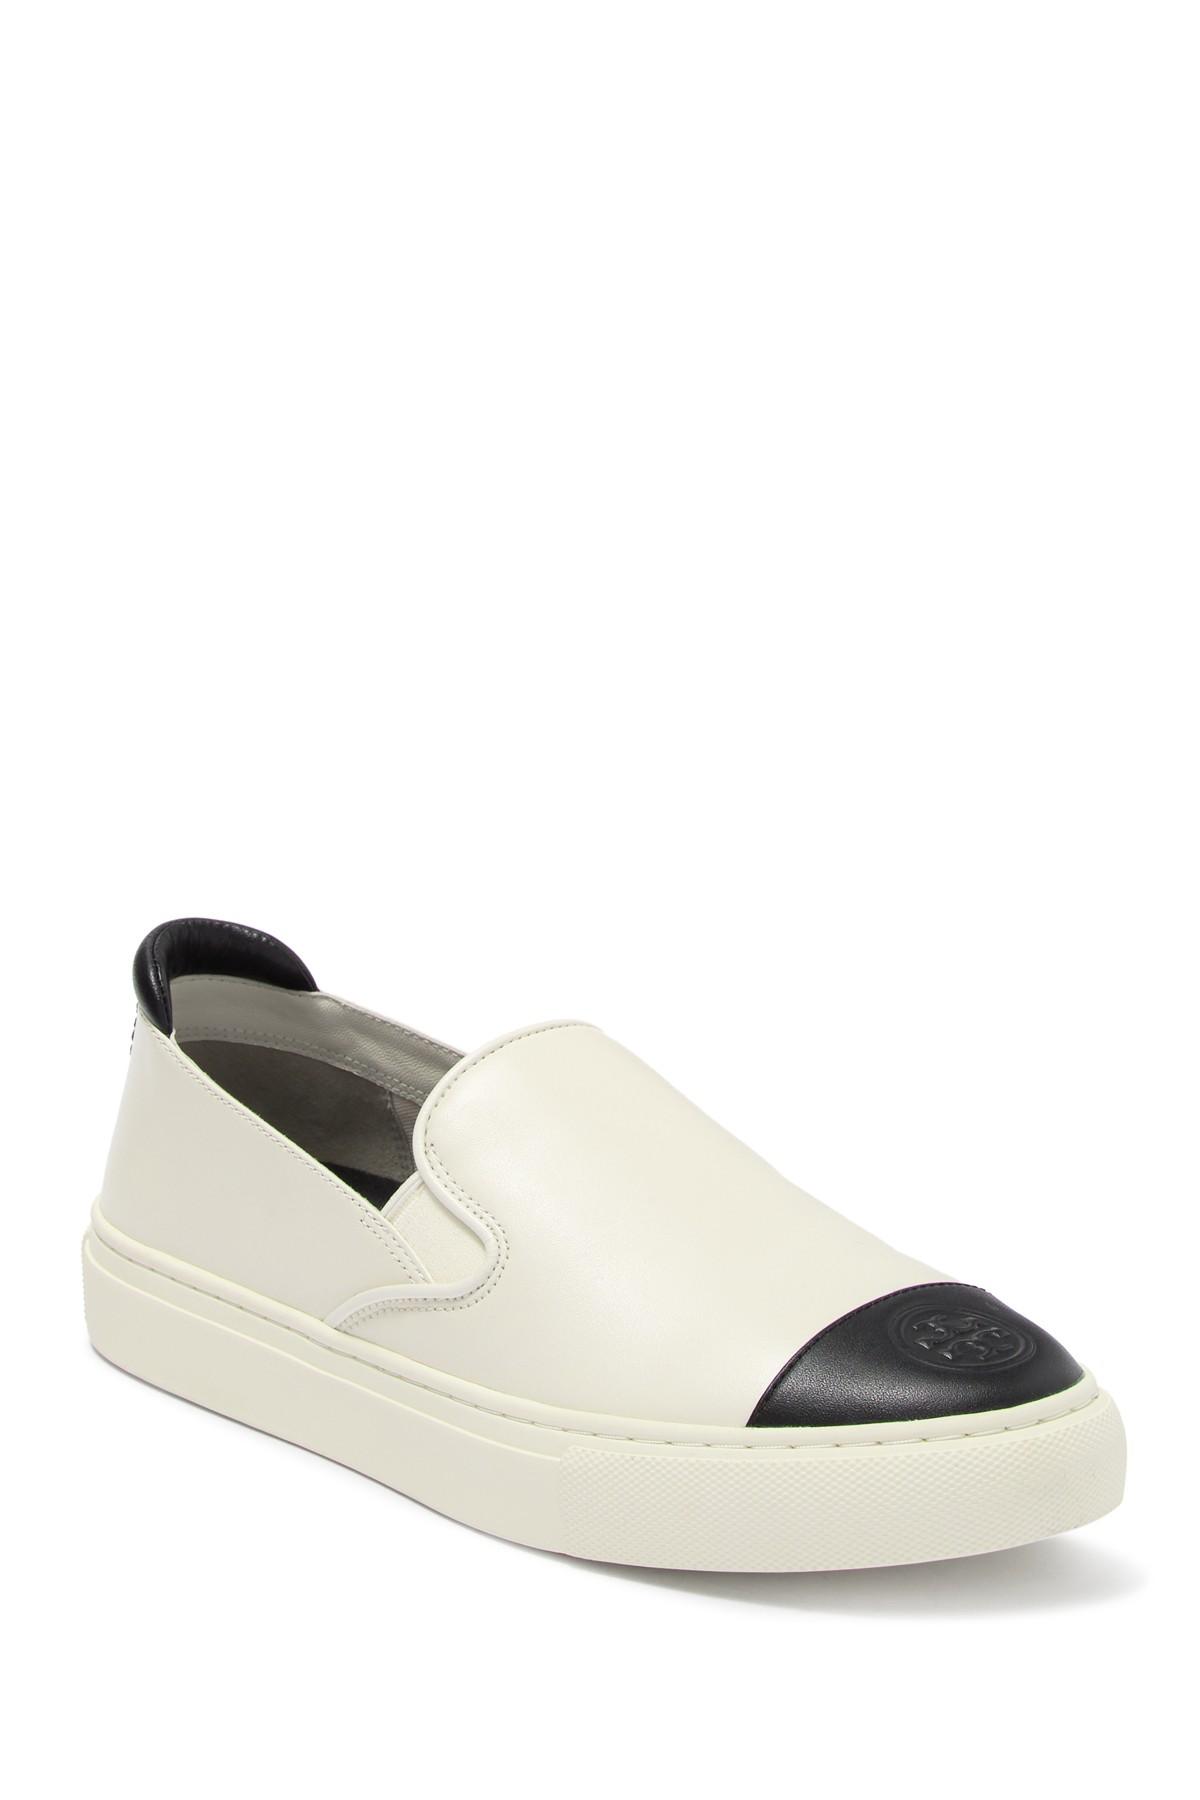 Tory Burch Leather Color Block Slip-on 